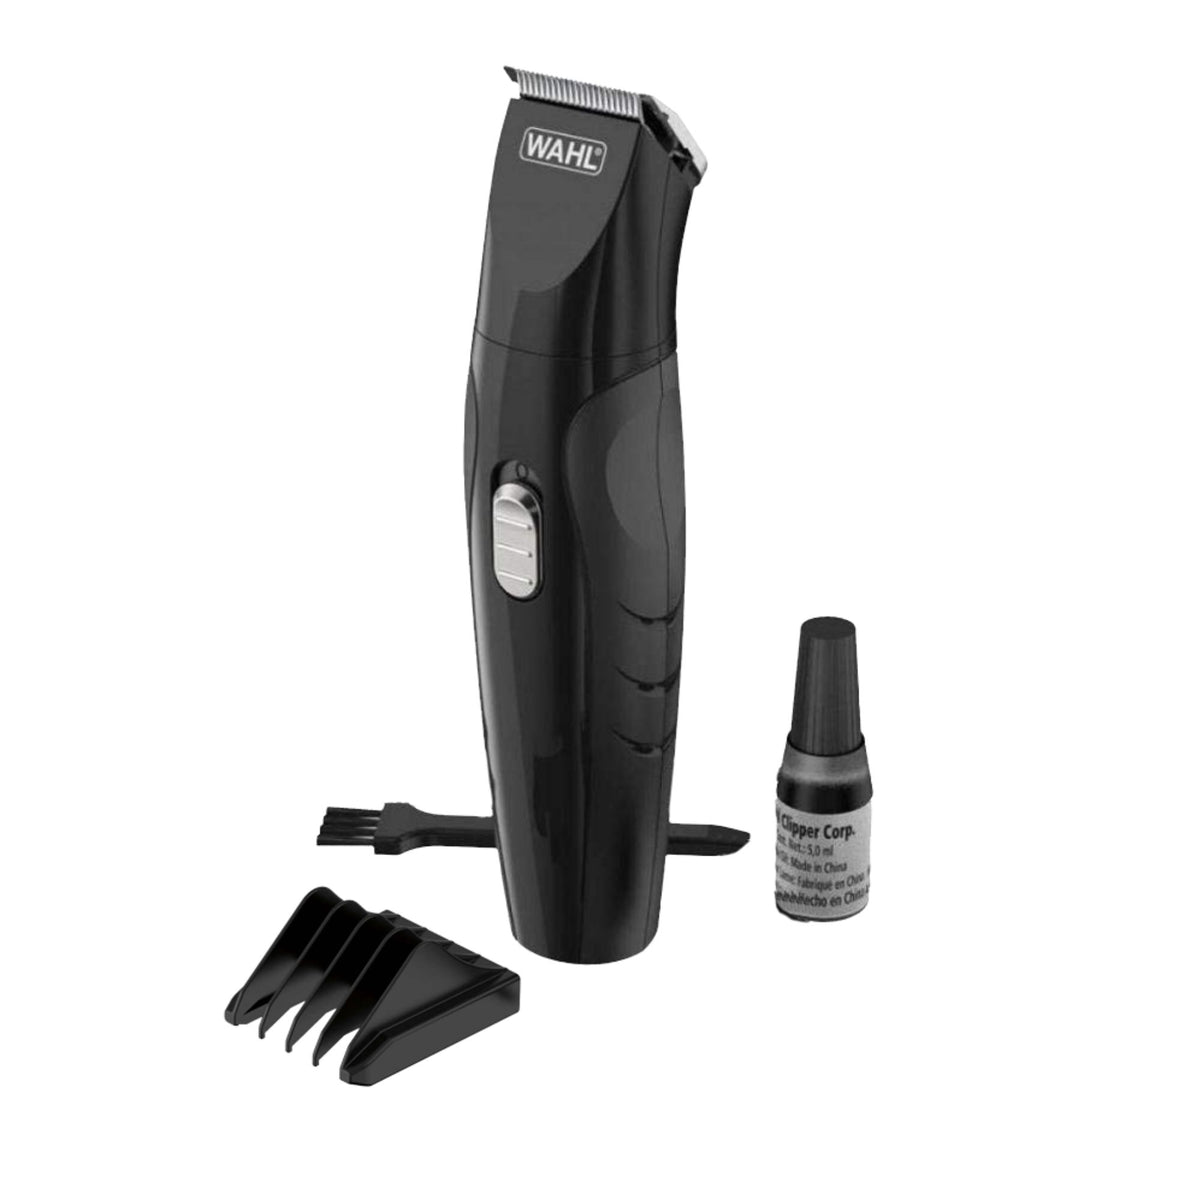 Wahl Groomsman Rechargeable Cordless Trimmer Black 9685-024 Wahl